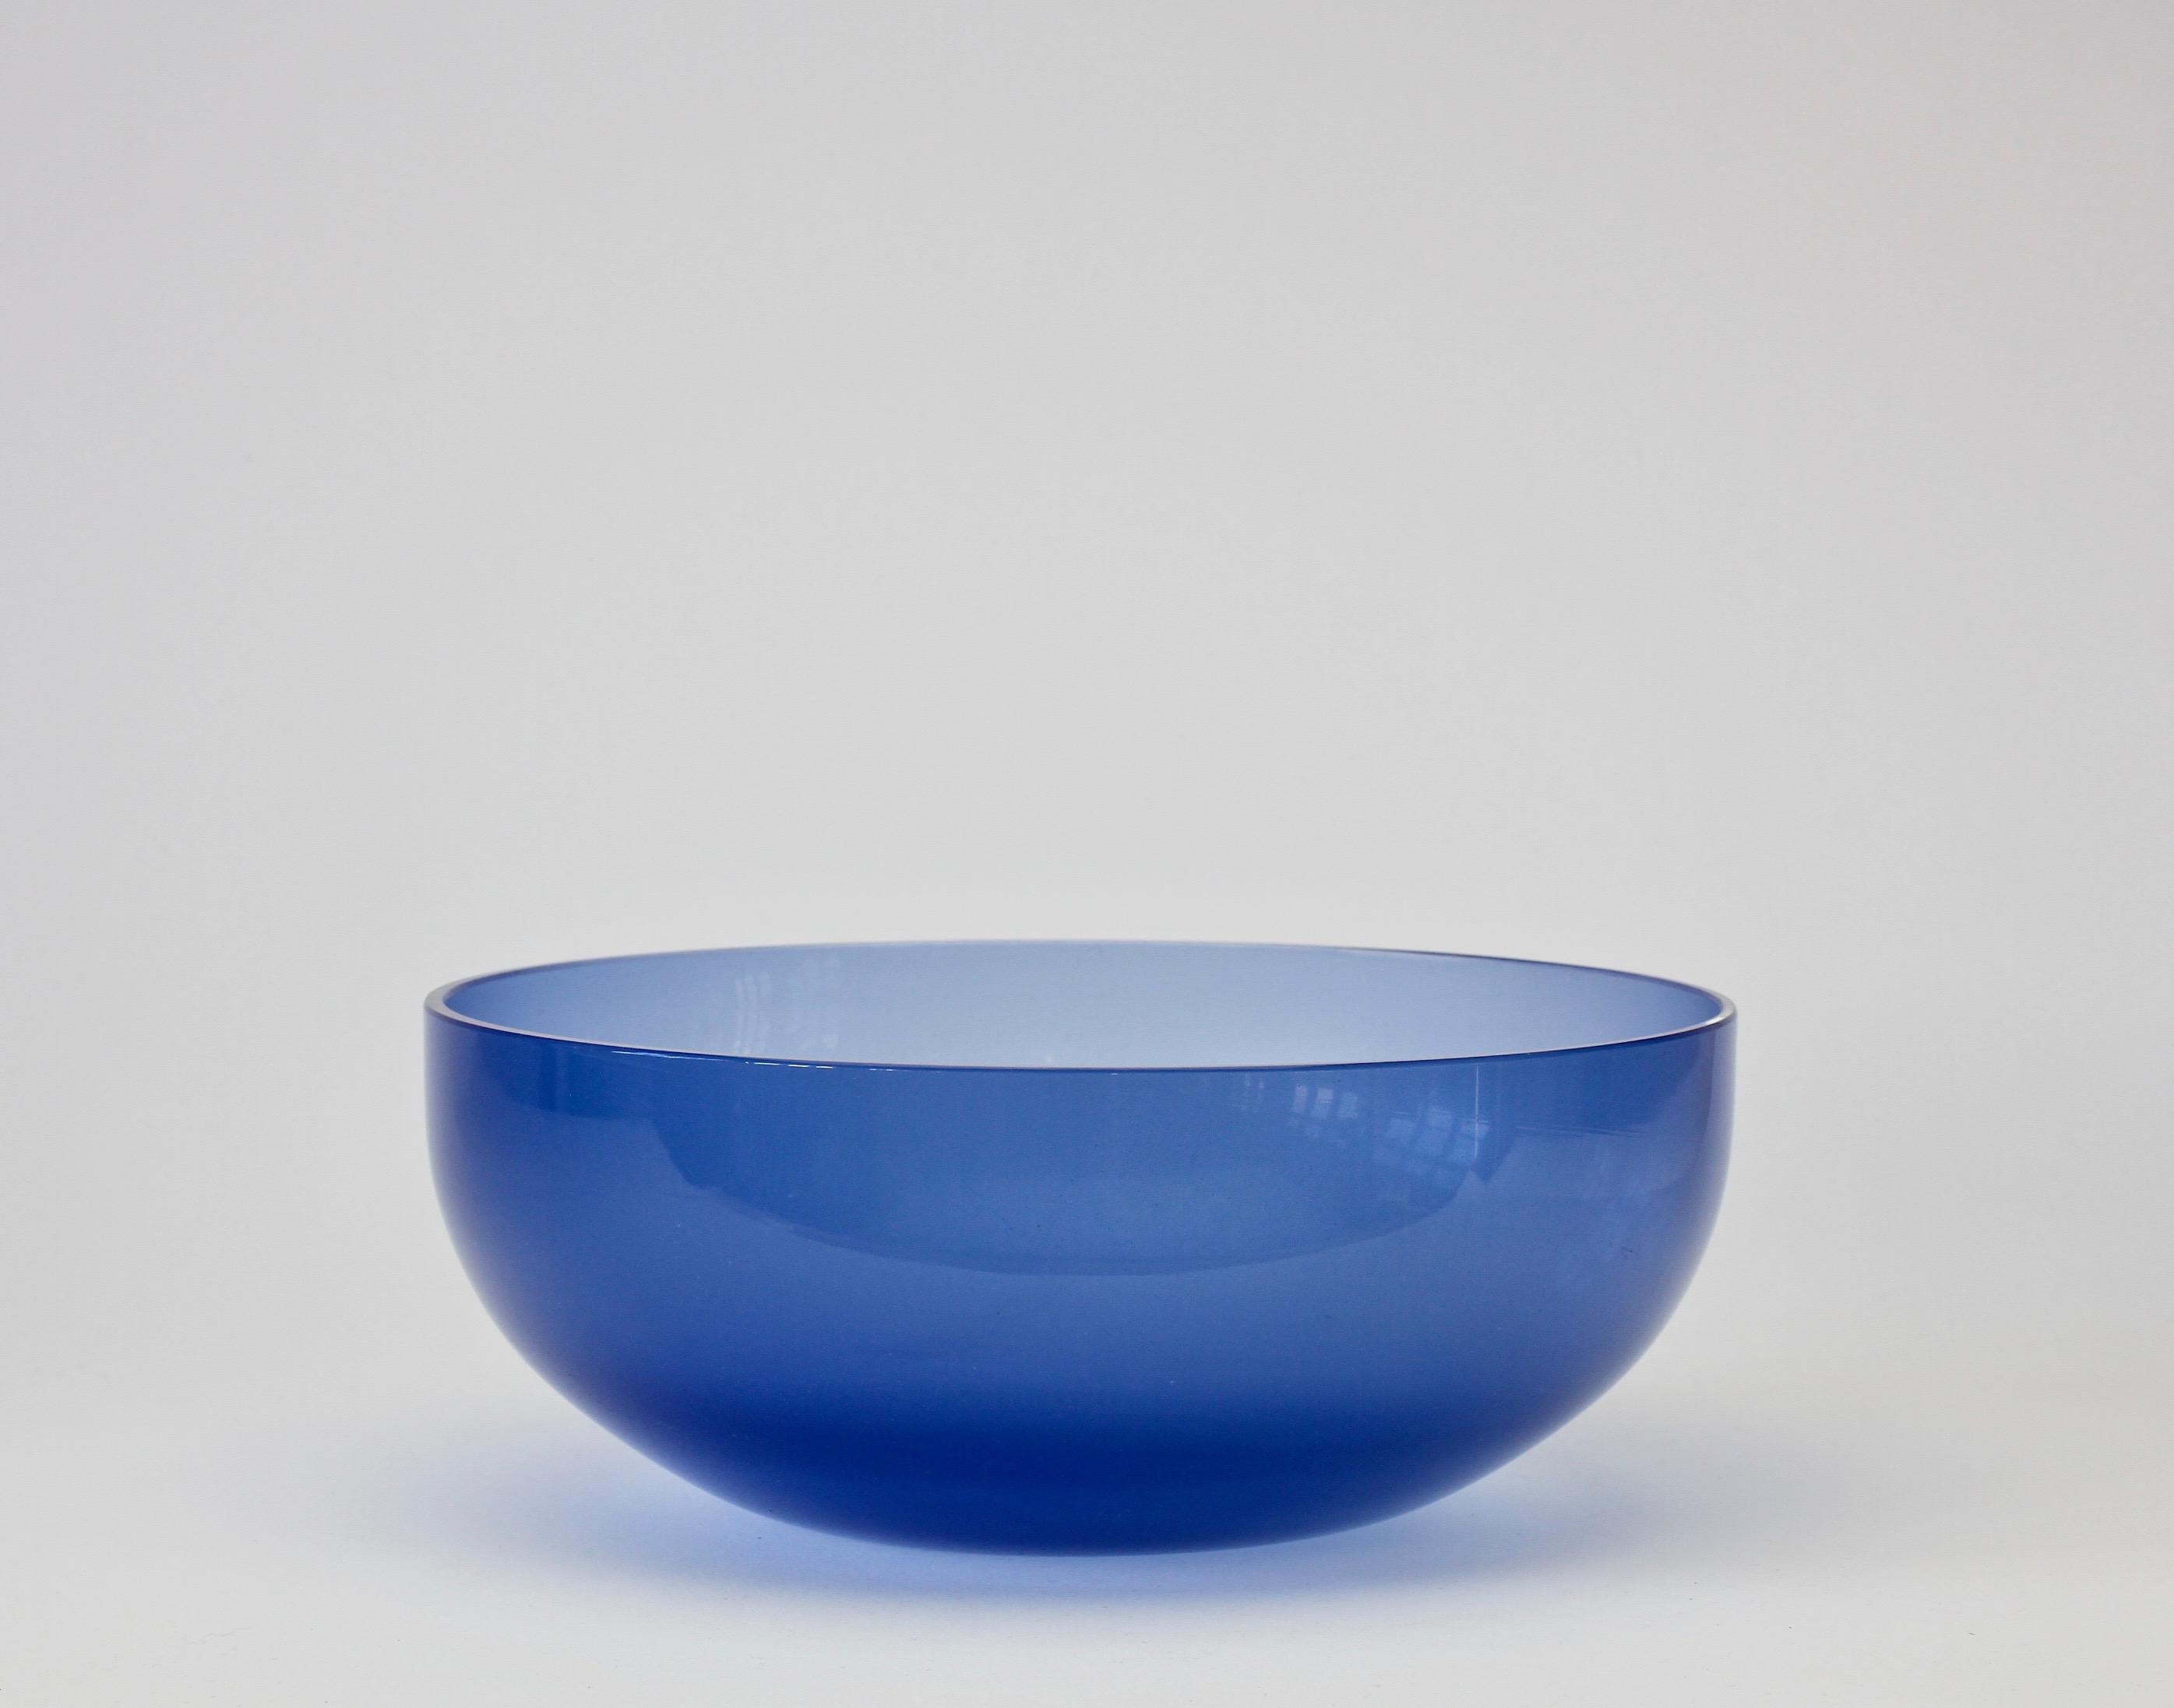 Sapphire blue colored (colored) vintage Murano glass serving bowl or dish attributed to Italian Murano glass designer by Antonio da Ros (1936-2012) for Cenedese, circa 1970-1990. Wonderful sapphire blue color. Simplistic yet elegant form, almost